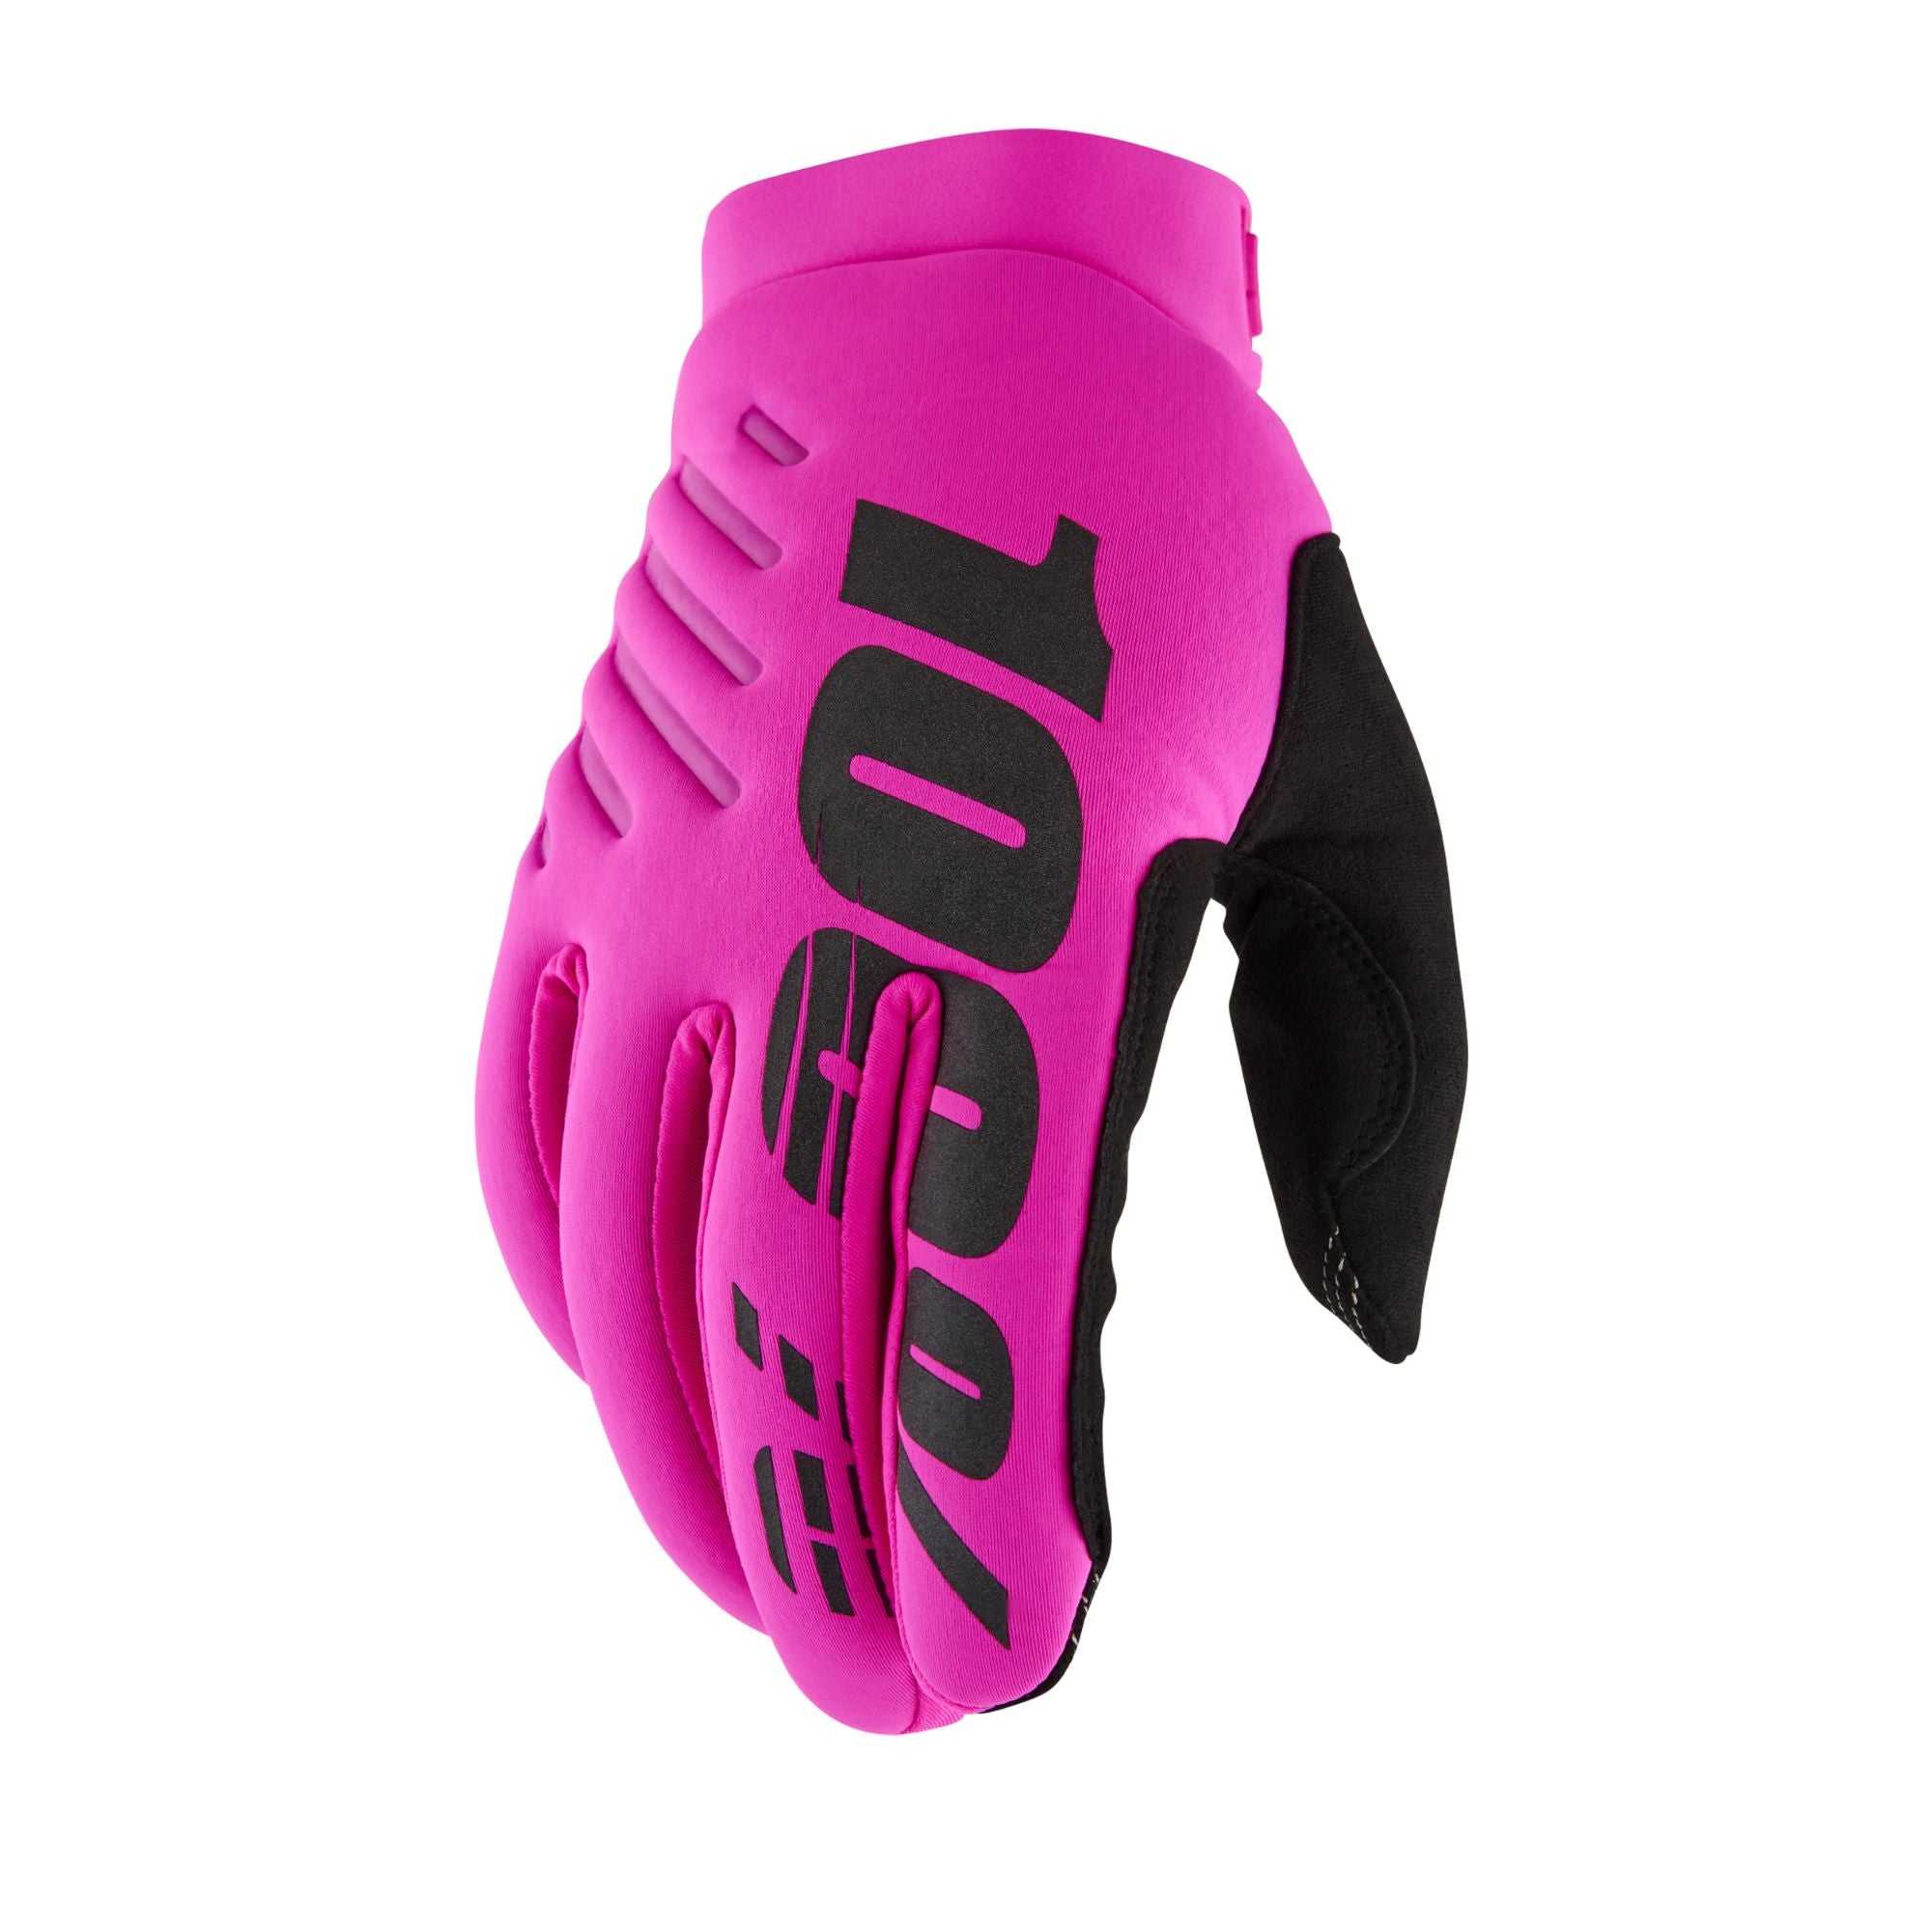 Ladies Full Finger Cycling Gloves 100% Brisker Ladies AW22 Cold Weather Neon Pink/Black X Large